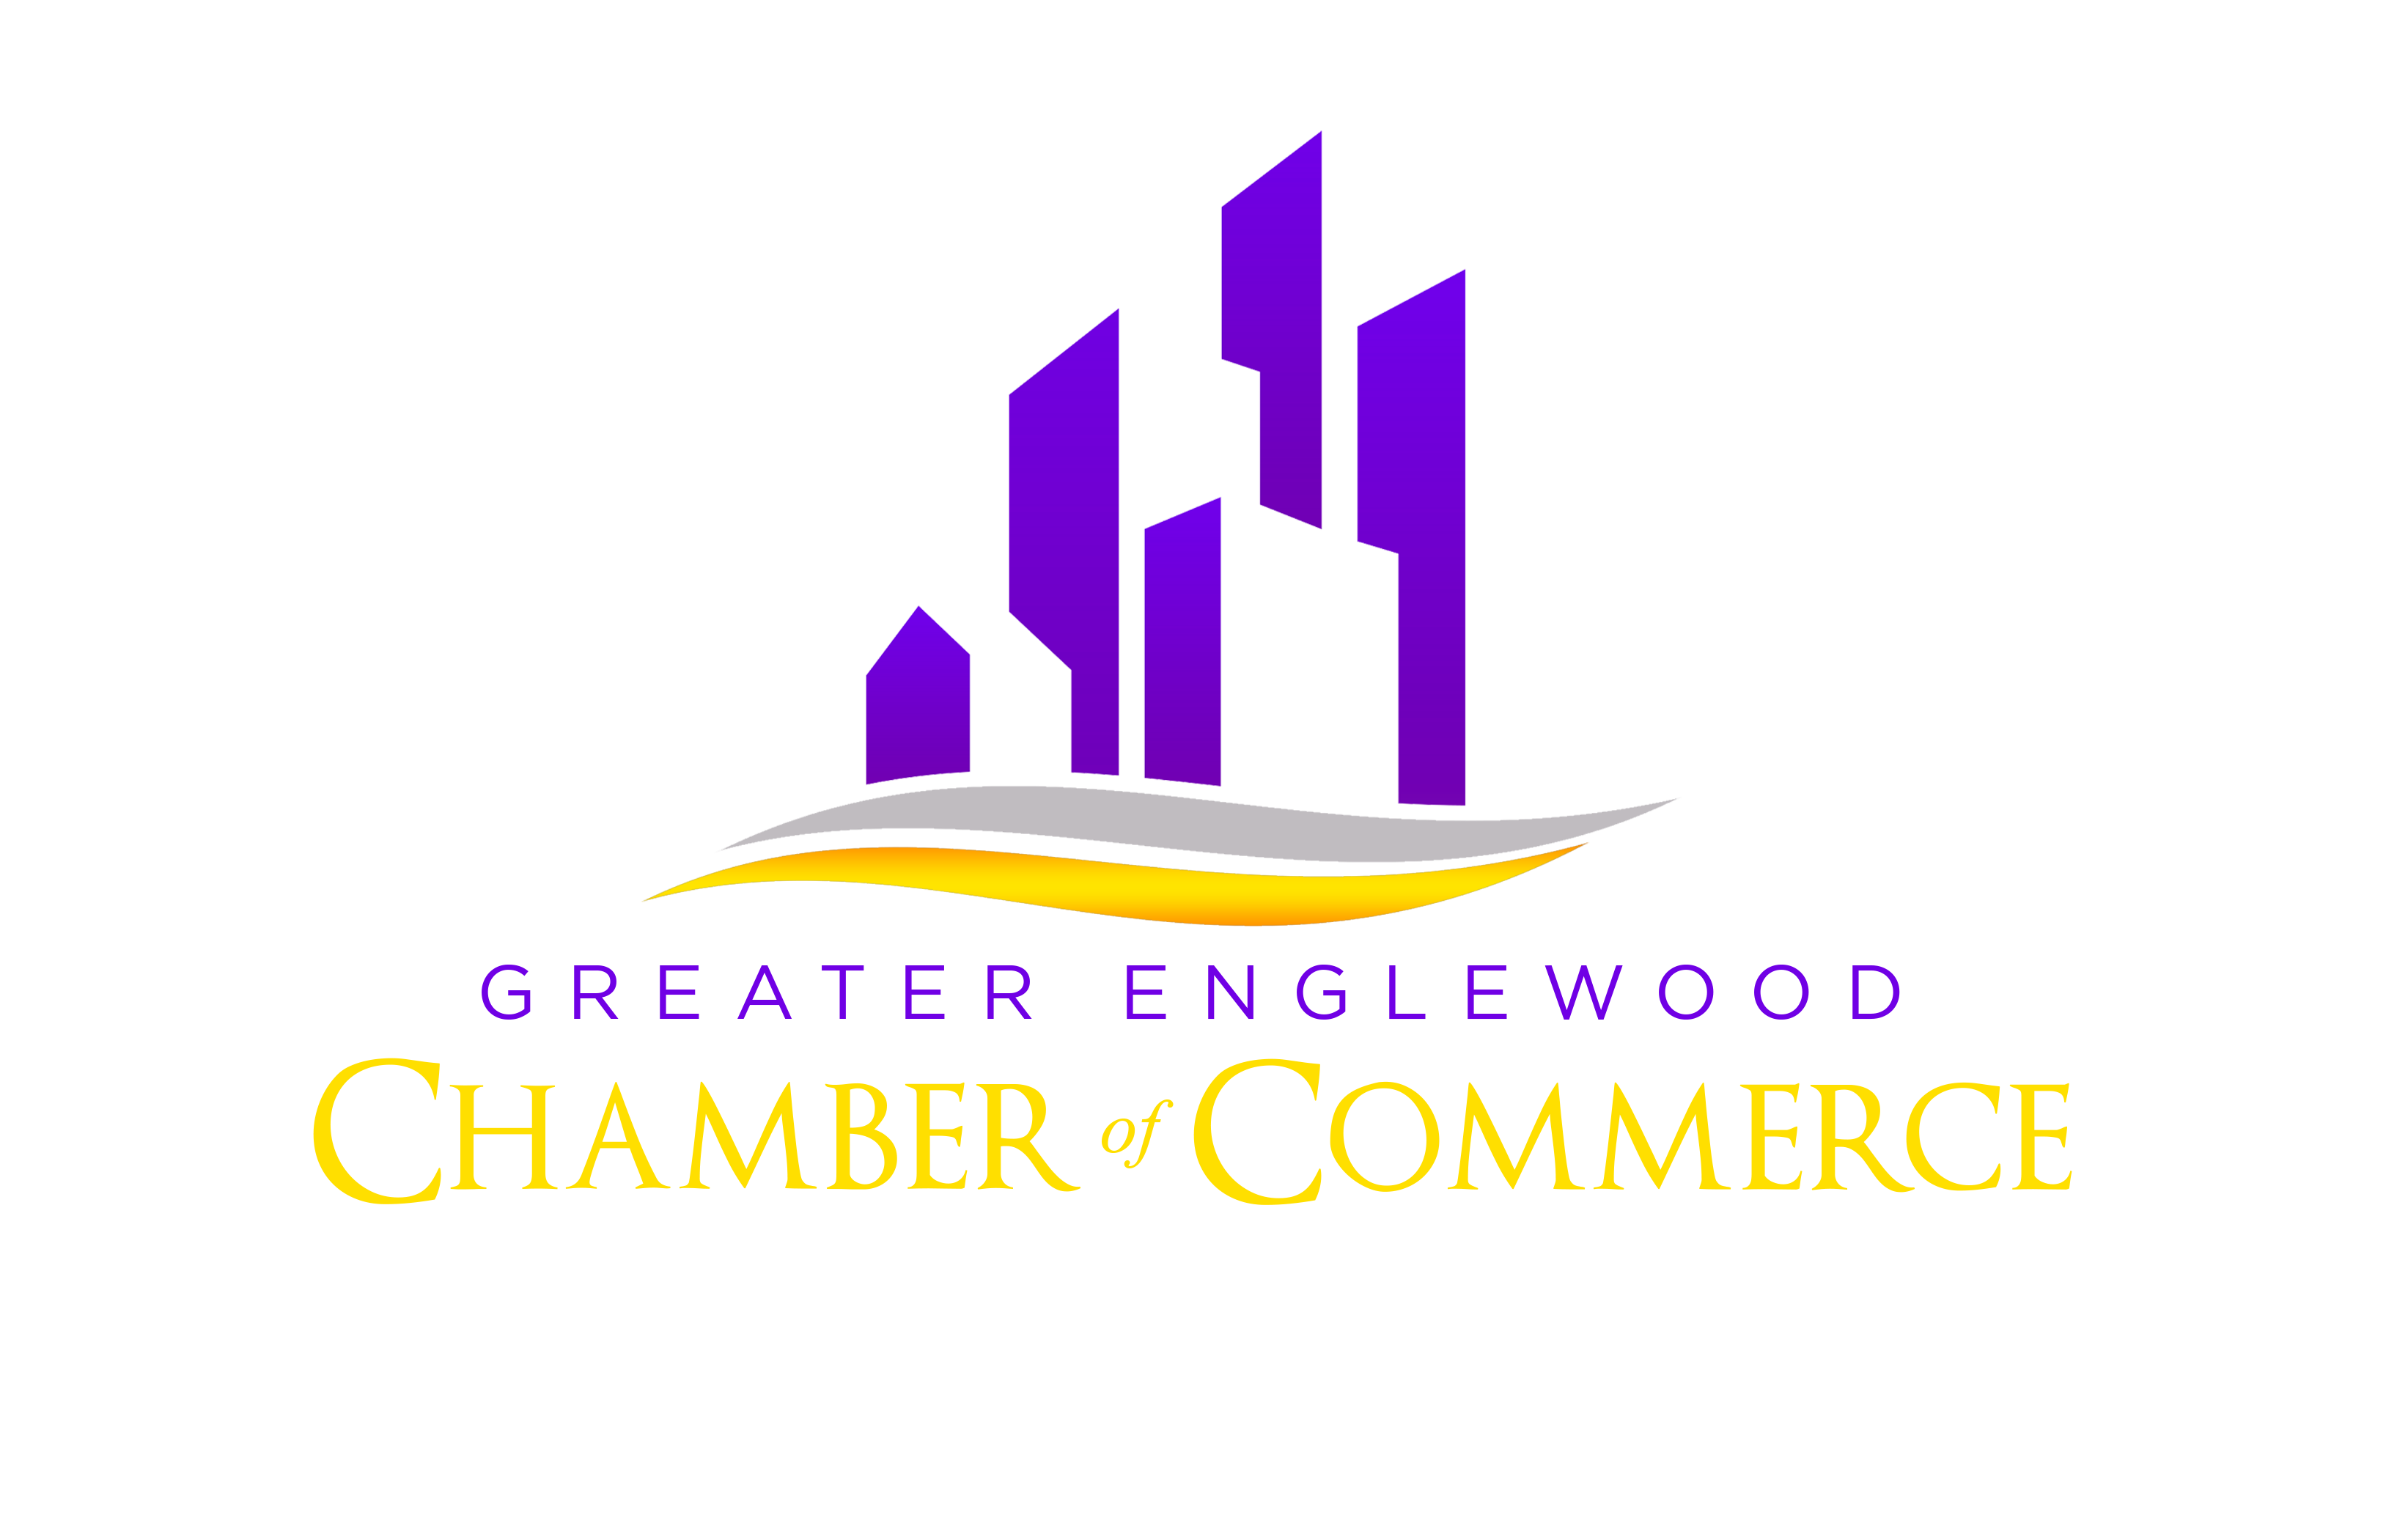 Greater Englewood Chamber of Commerce Fundraiser & Silent Auction